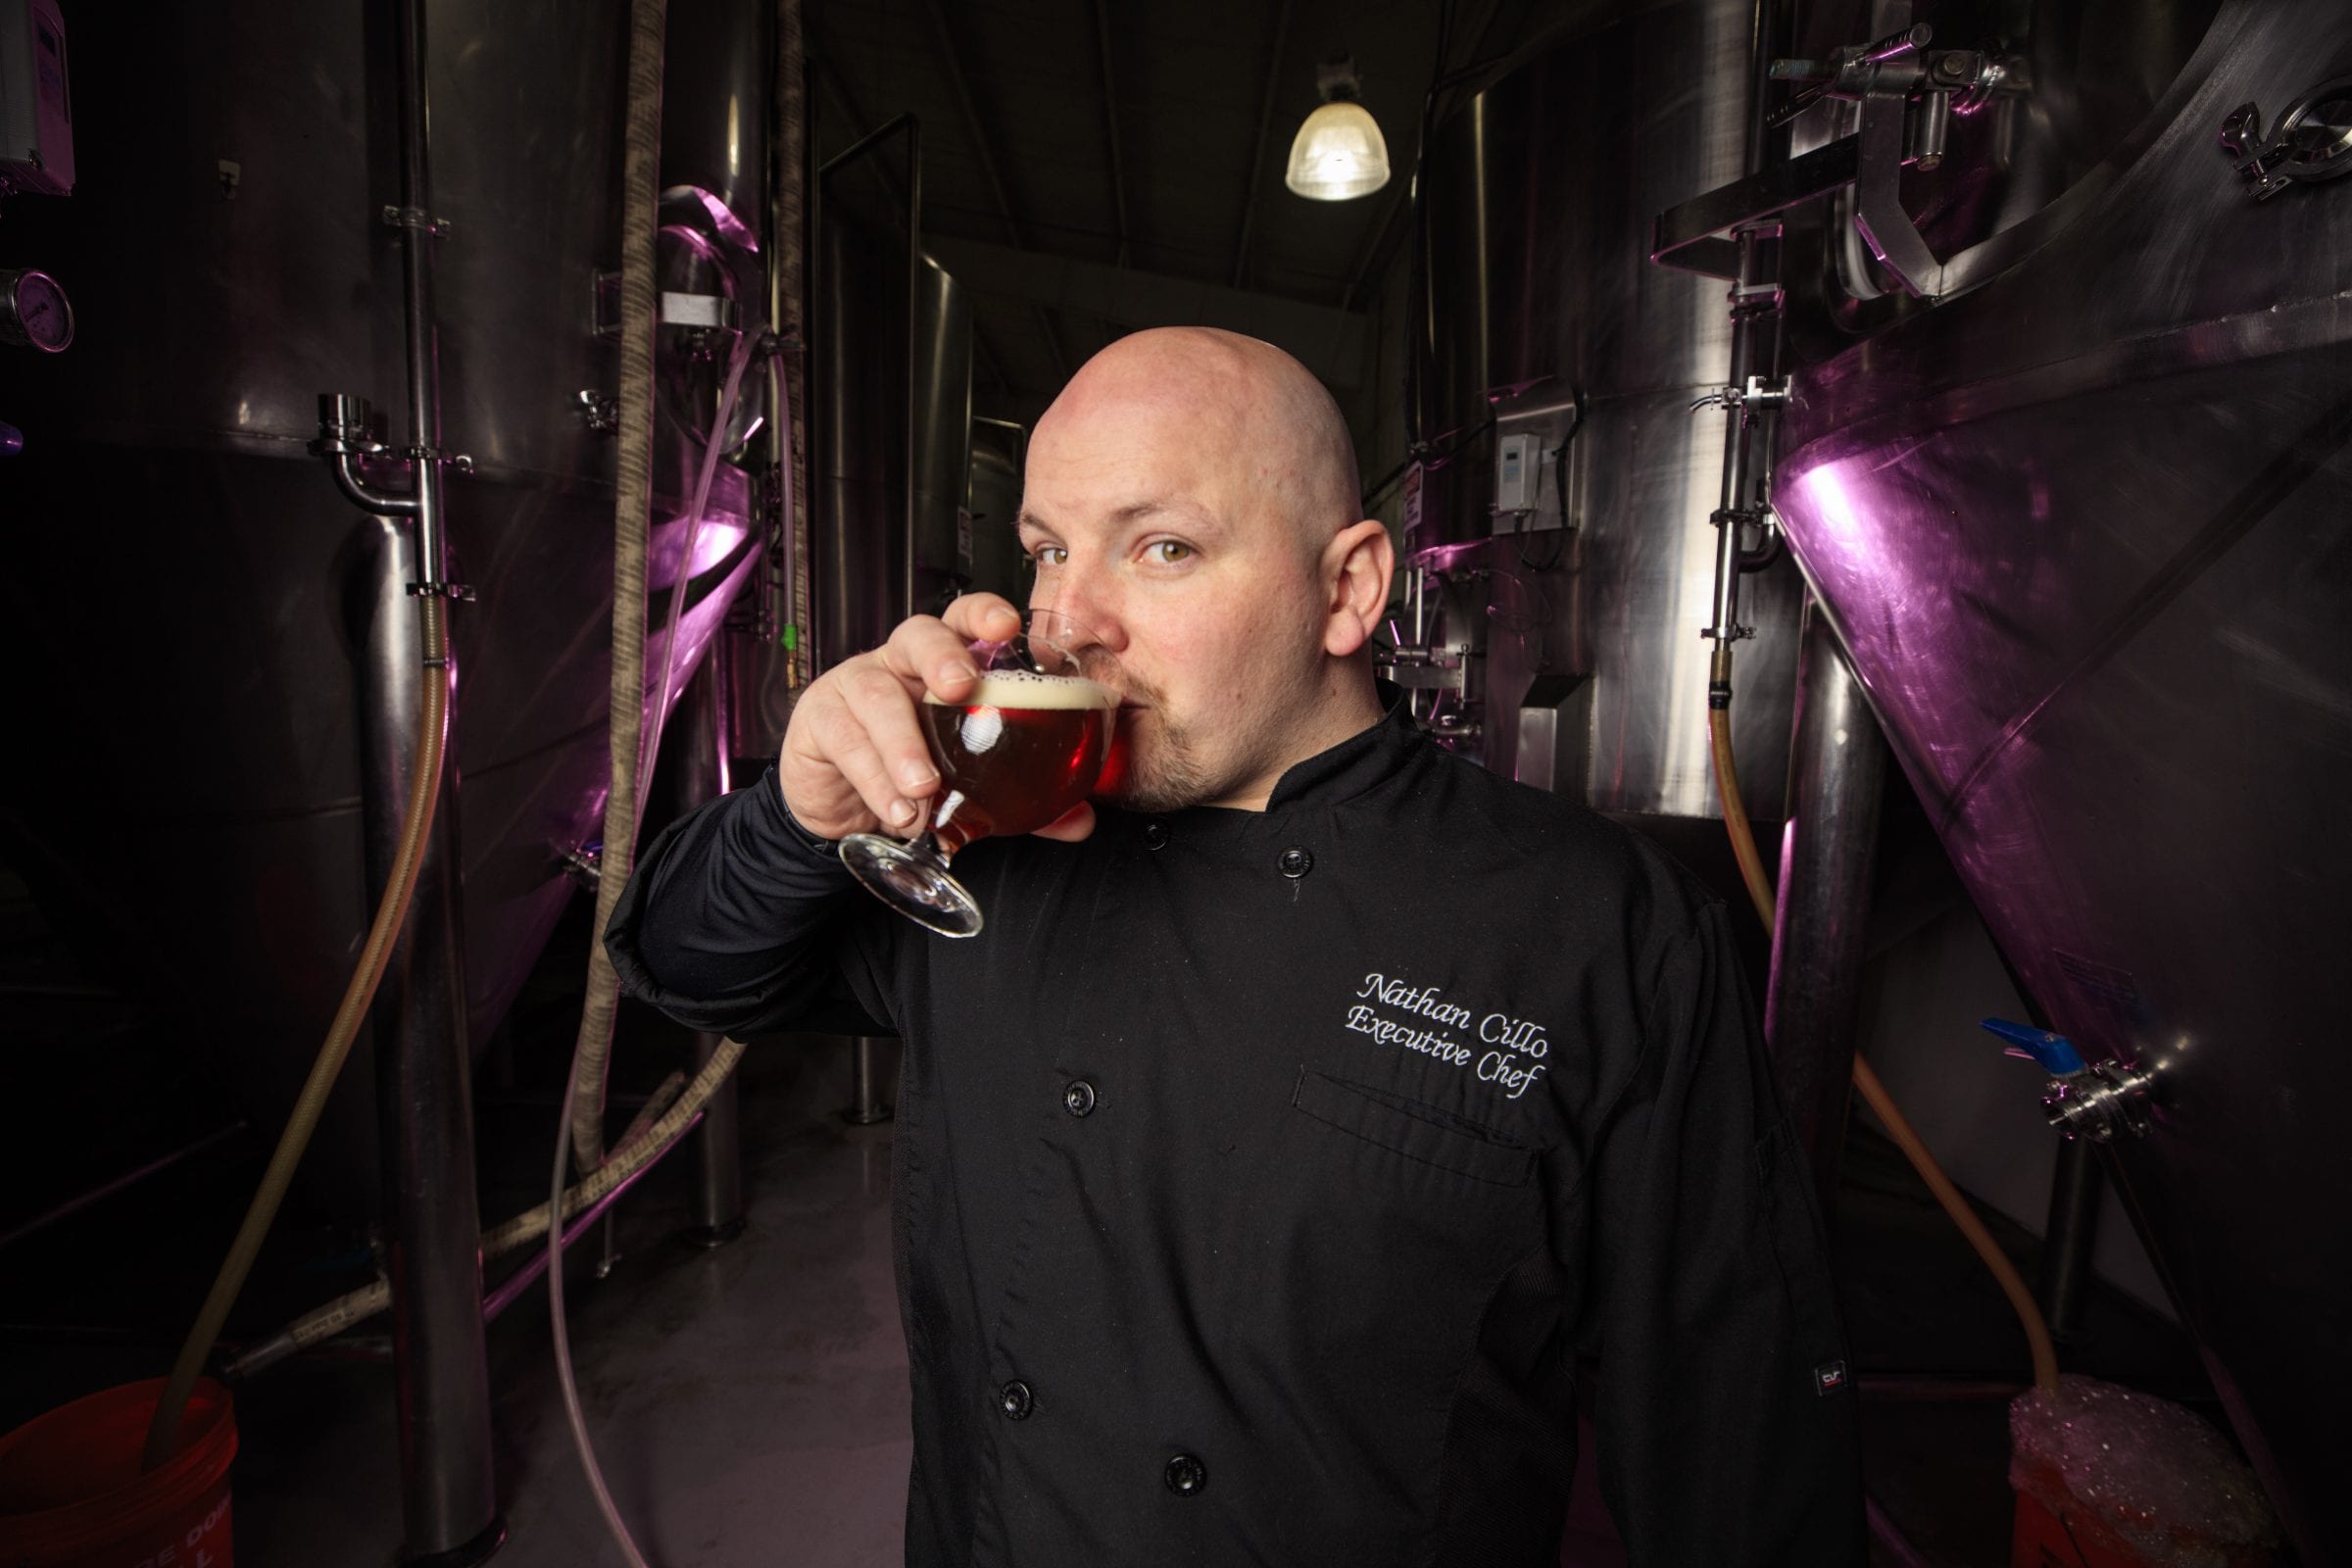 Voodoo beer franchise executive chef Nate Cillo